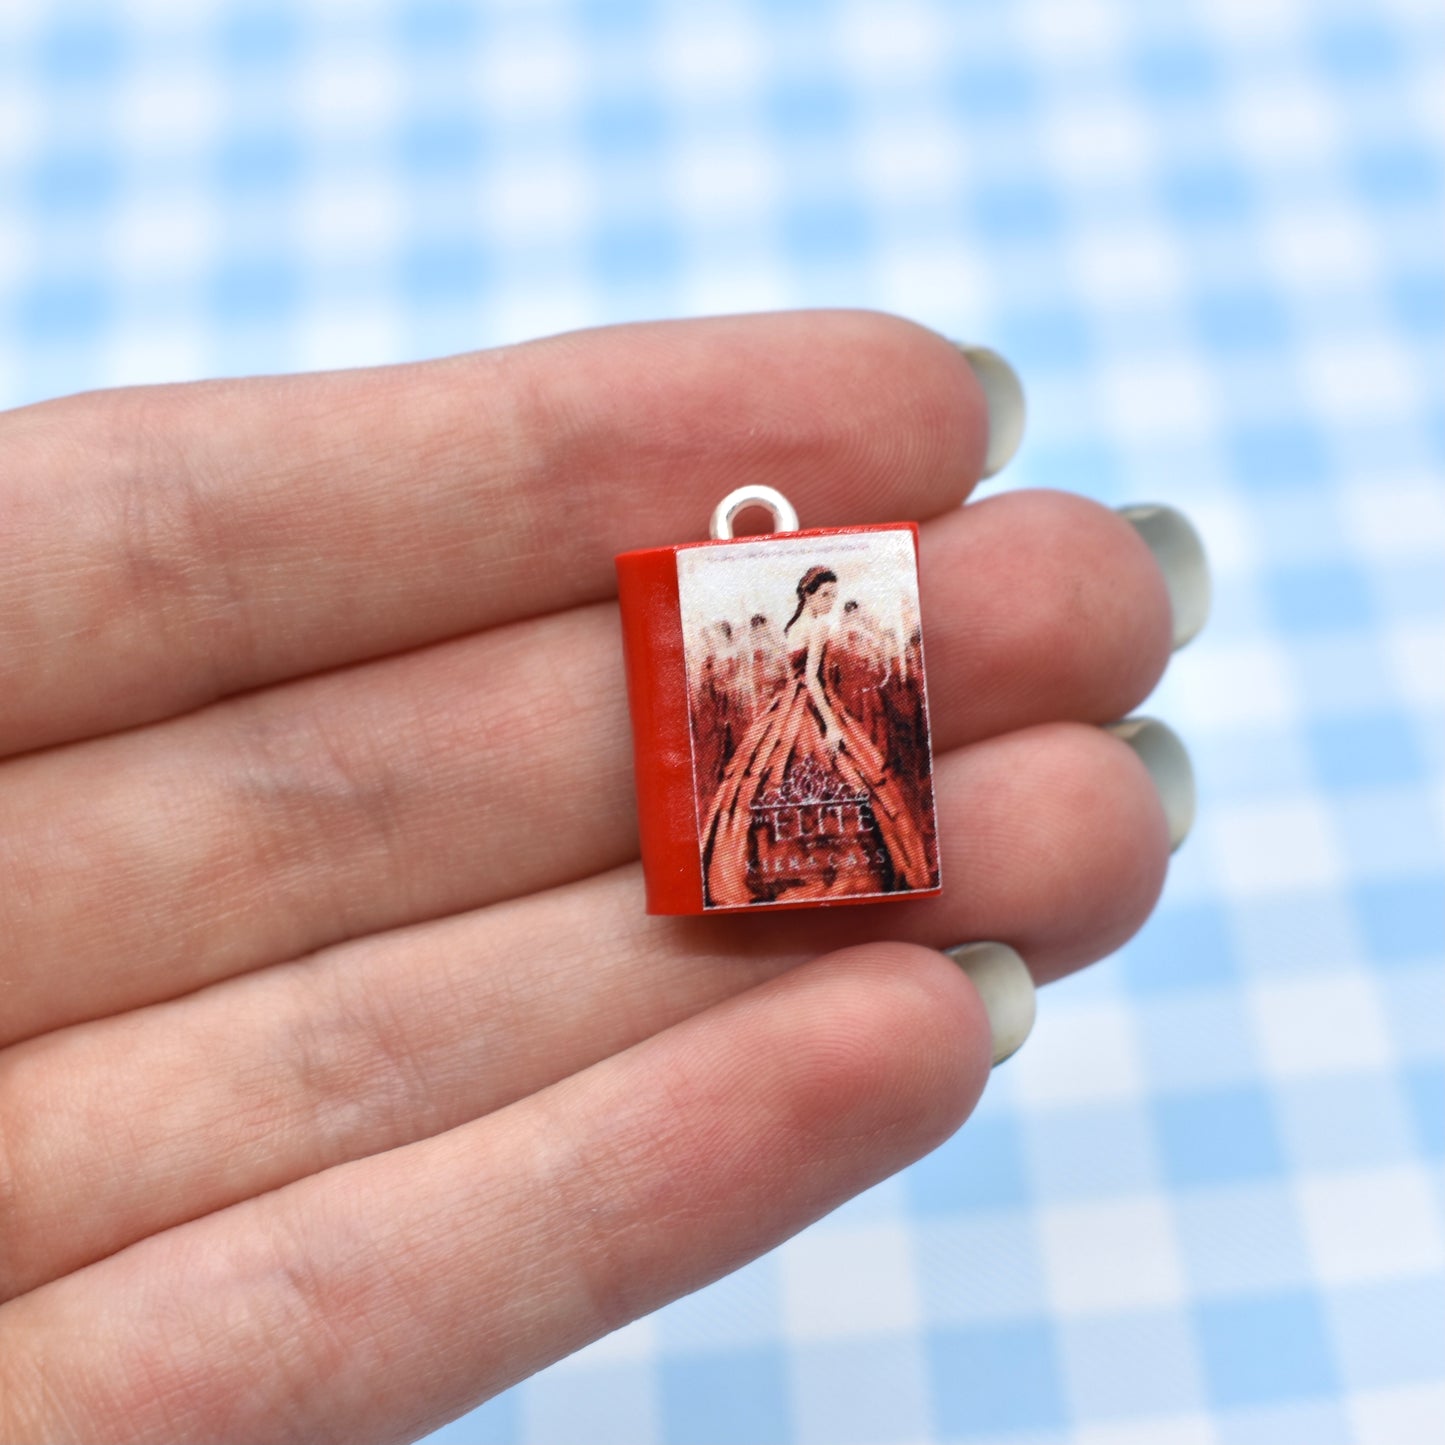 The Selection Inspired Book Charm